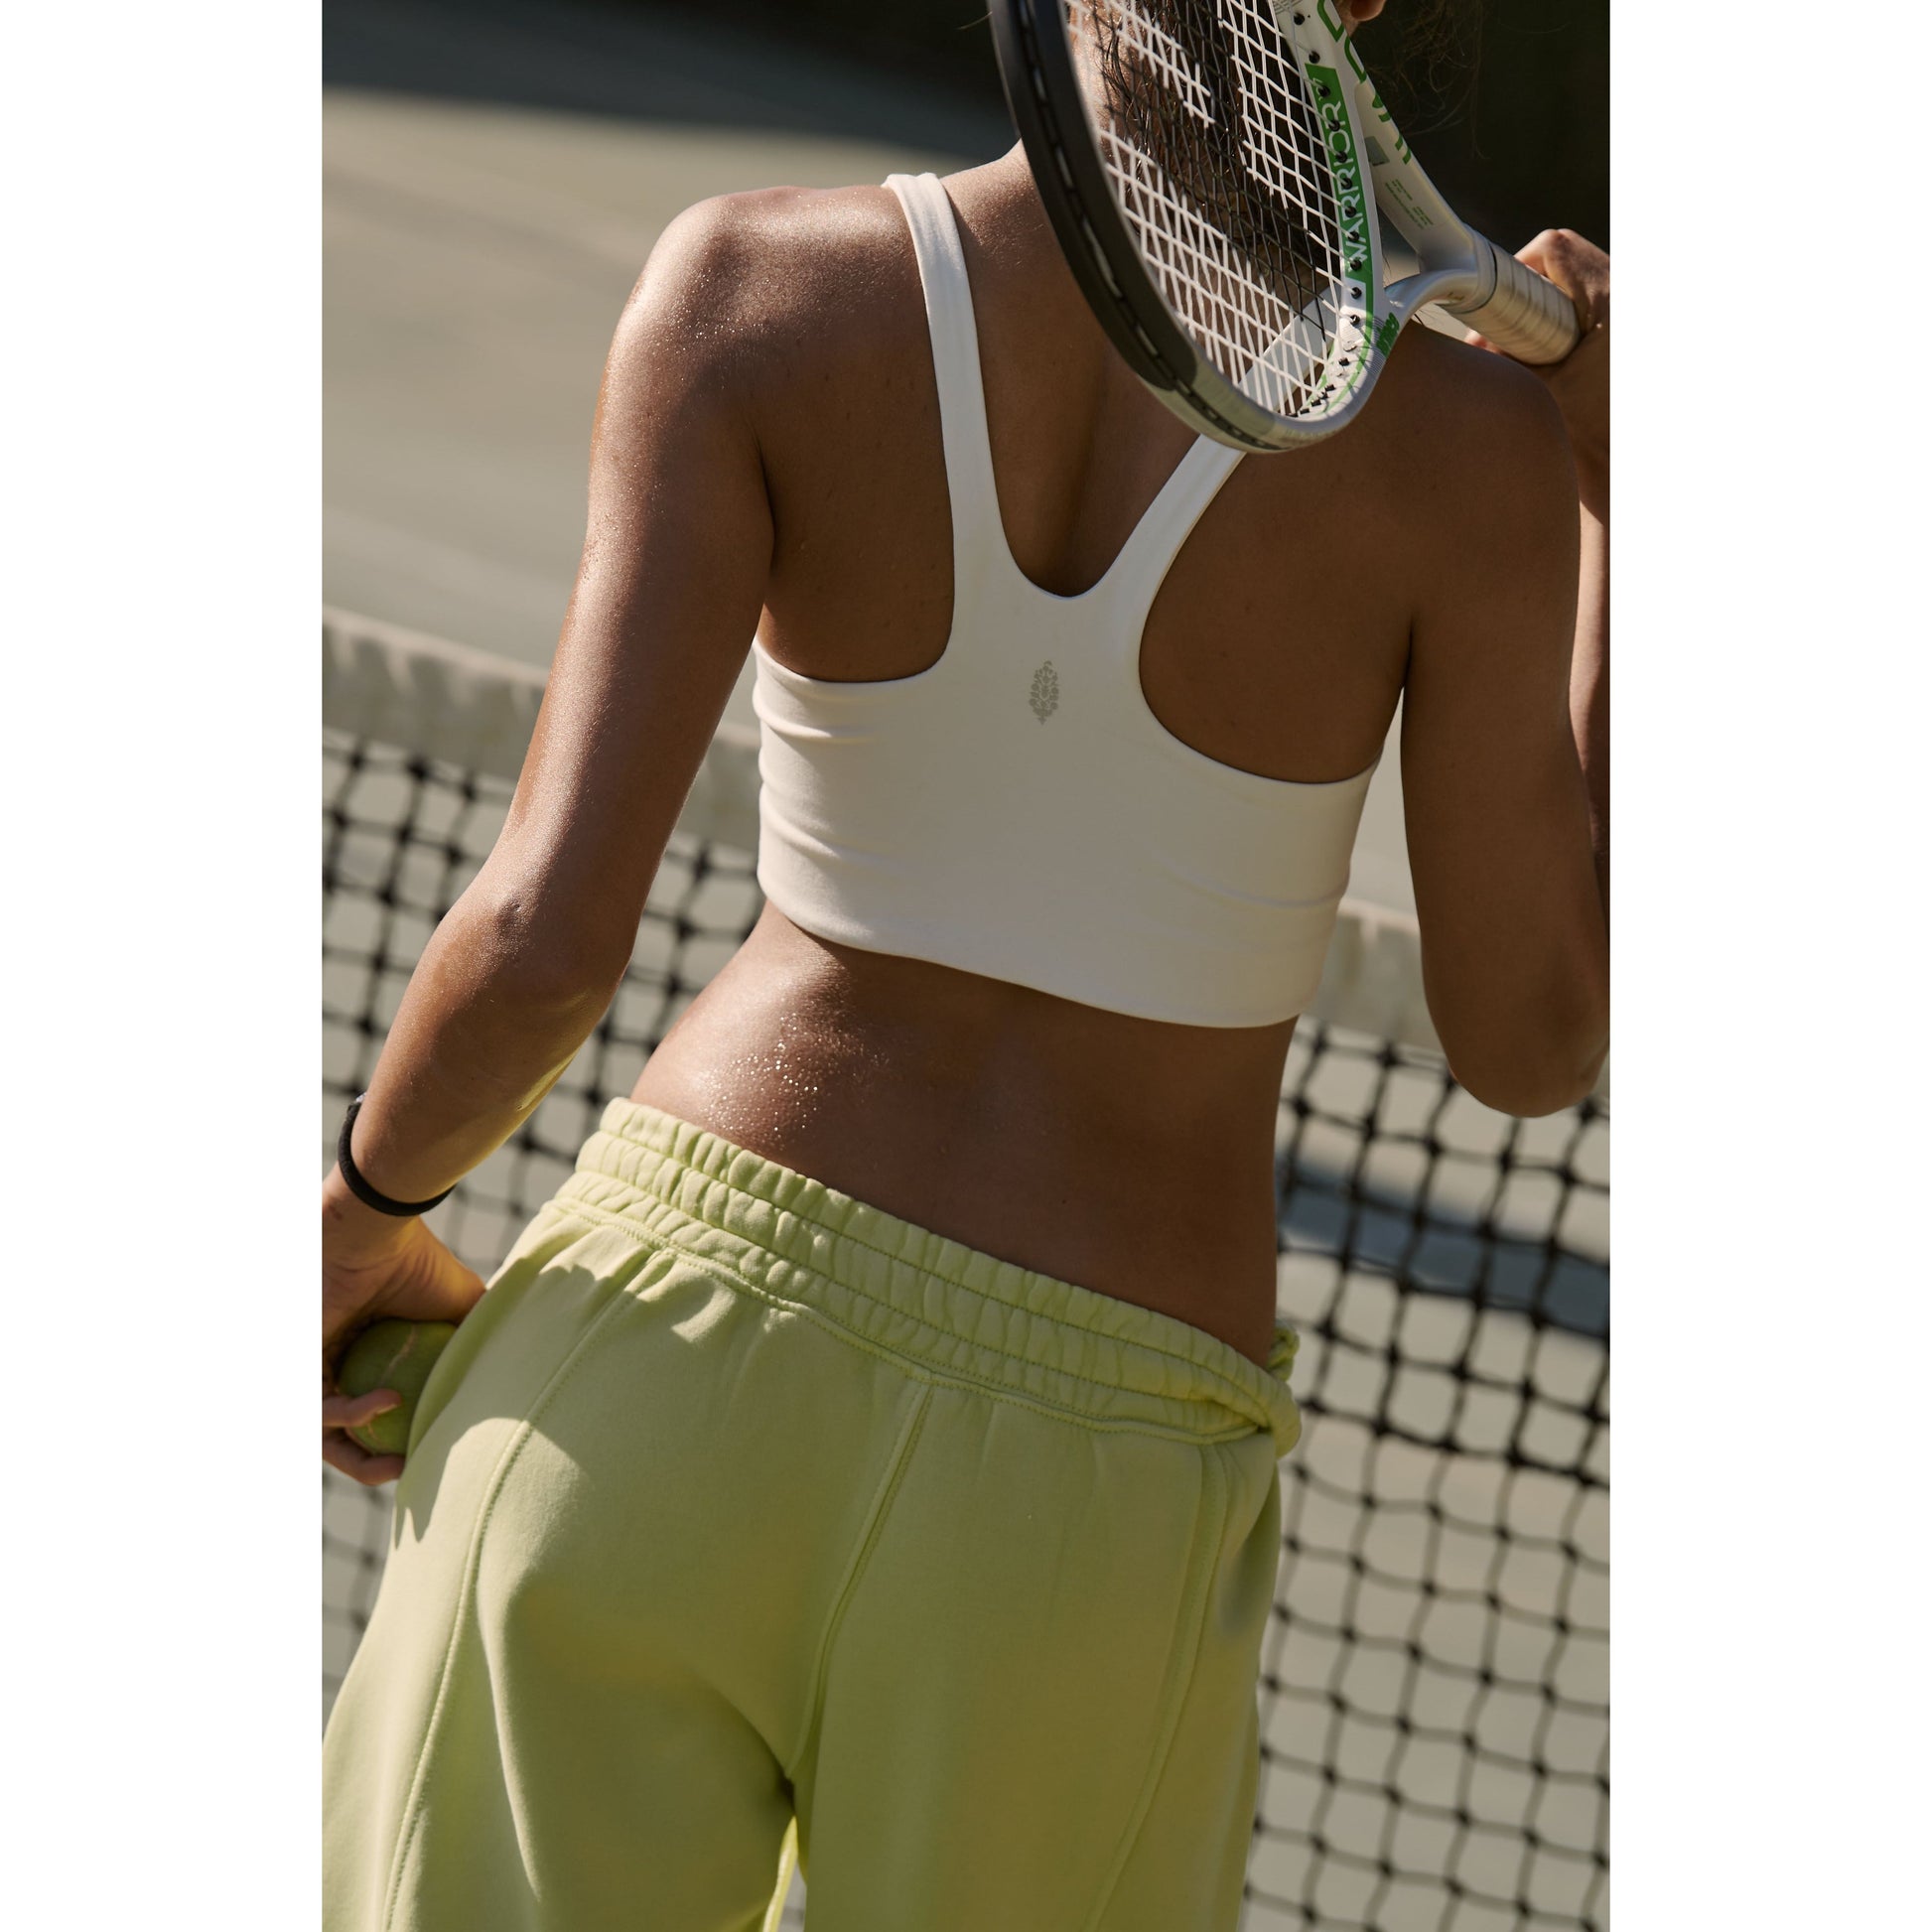 Woman in a Free People Movement Never Better SQ Neck Bra, White, and light green sweatpants holding a tennis racket, seen from the back.